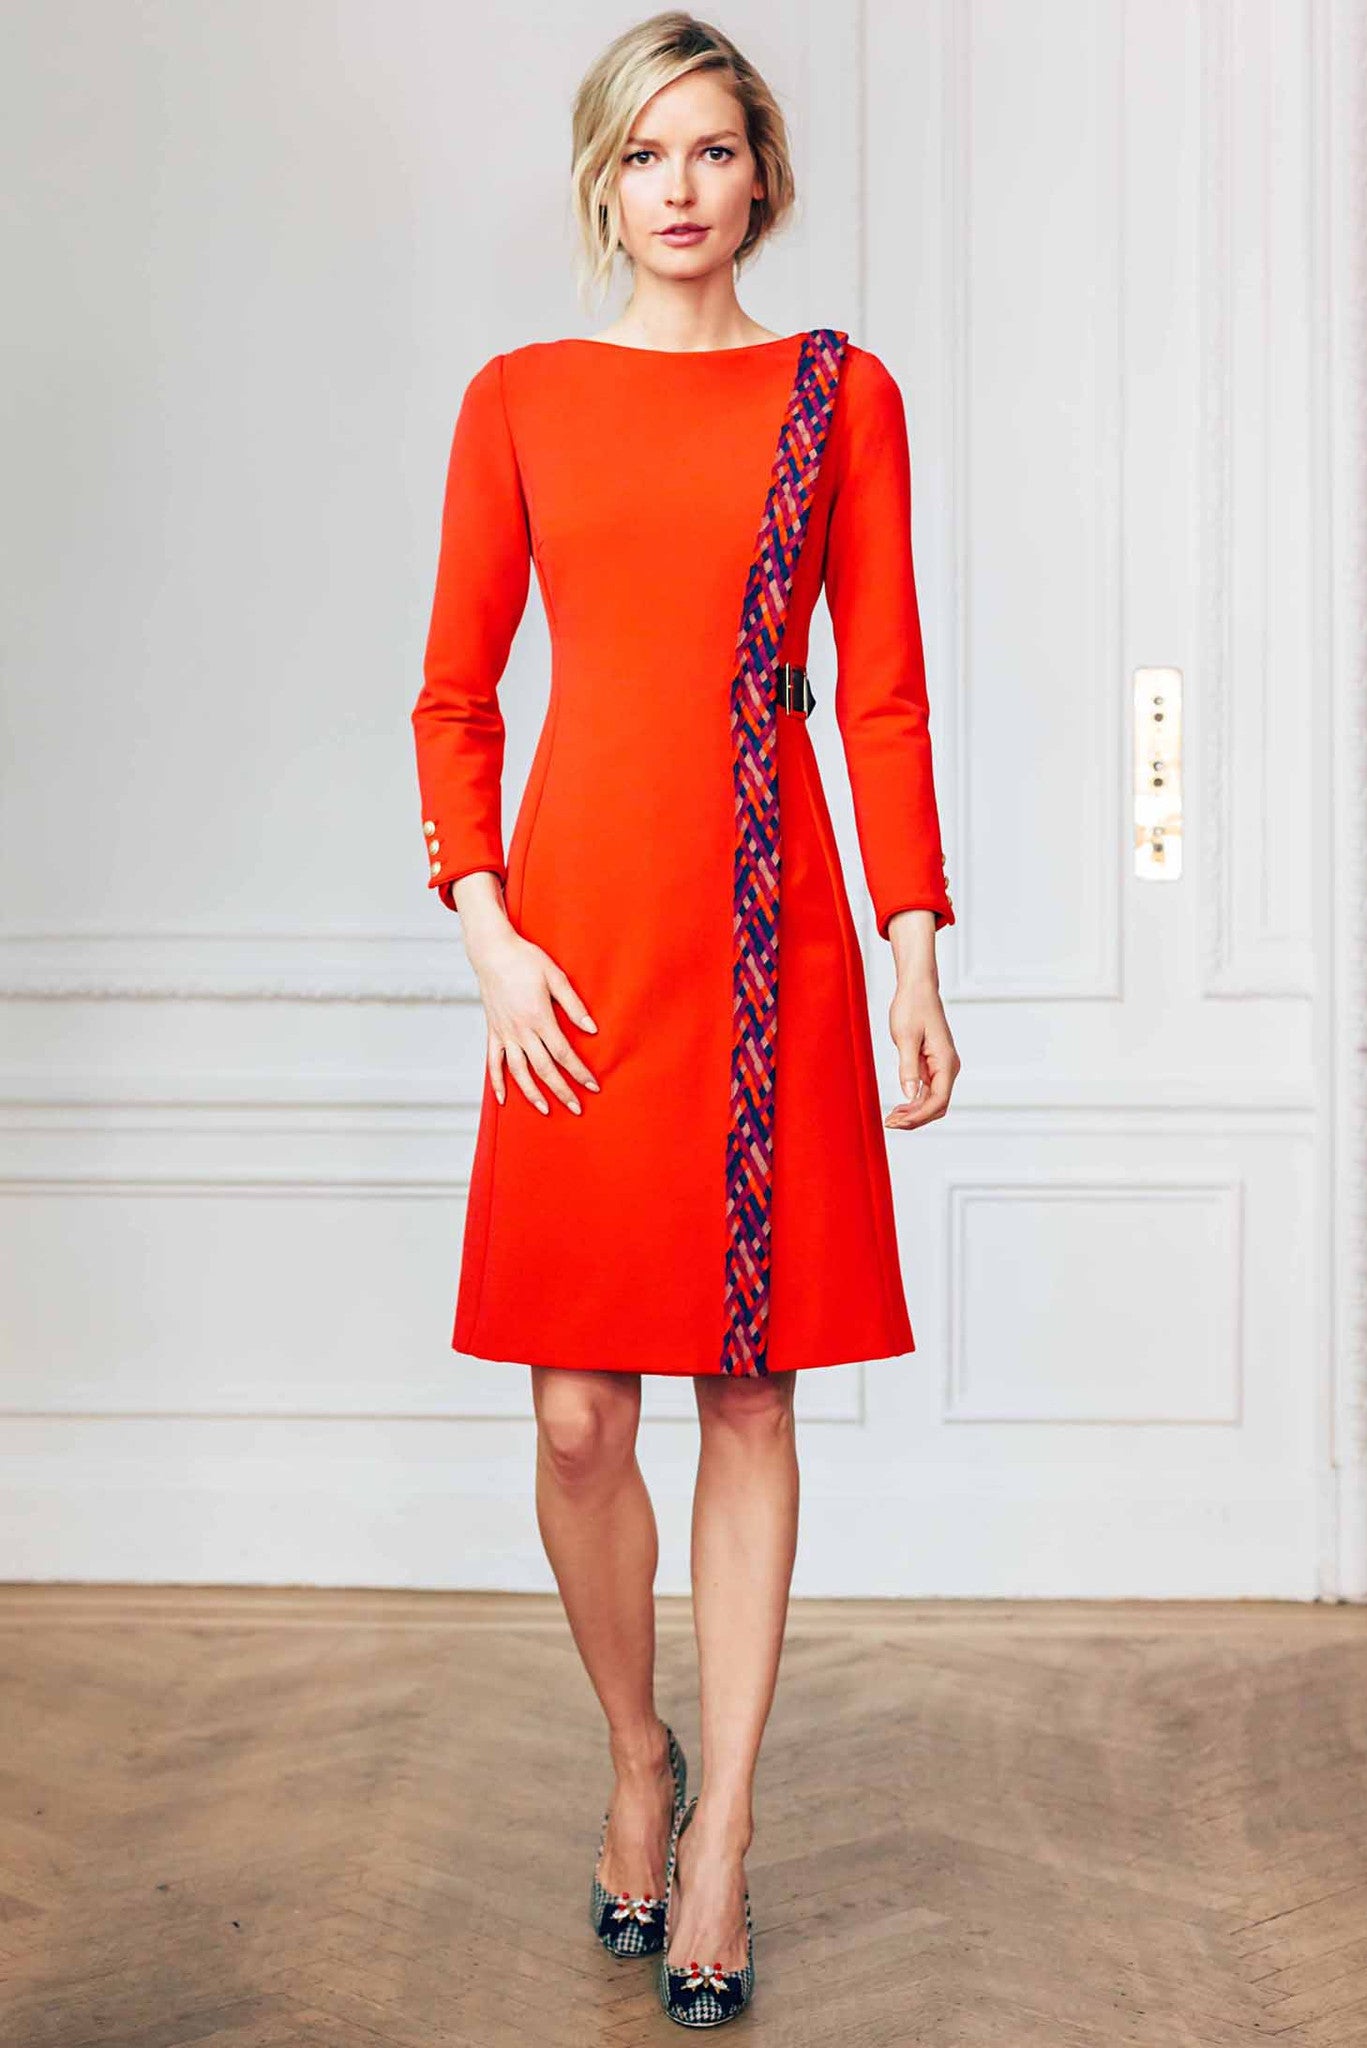 Bateau Neck Bracelet length Sleeve Dress With Woven Trim and Leather Side Buckle Closure